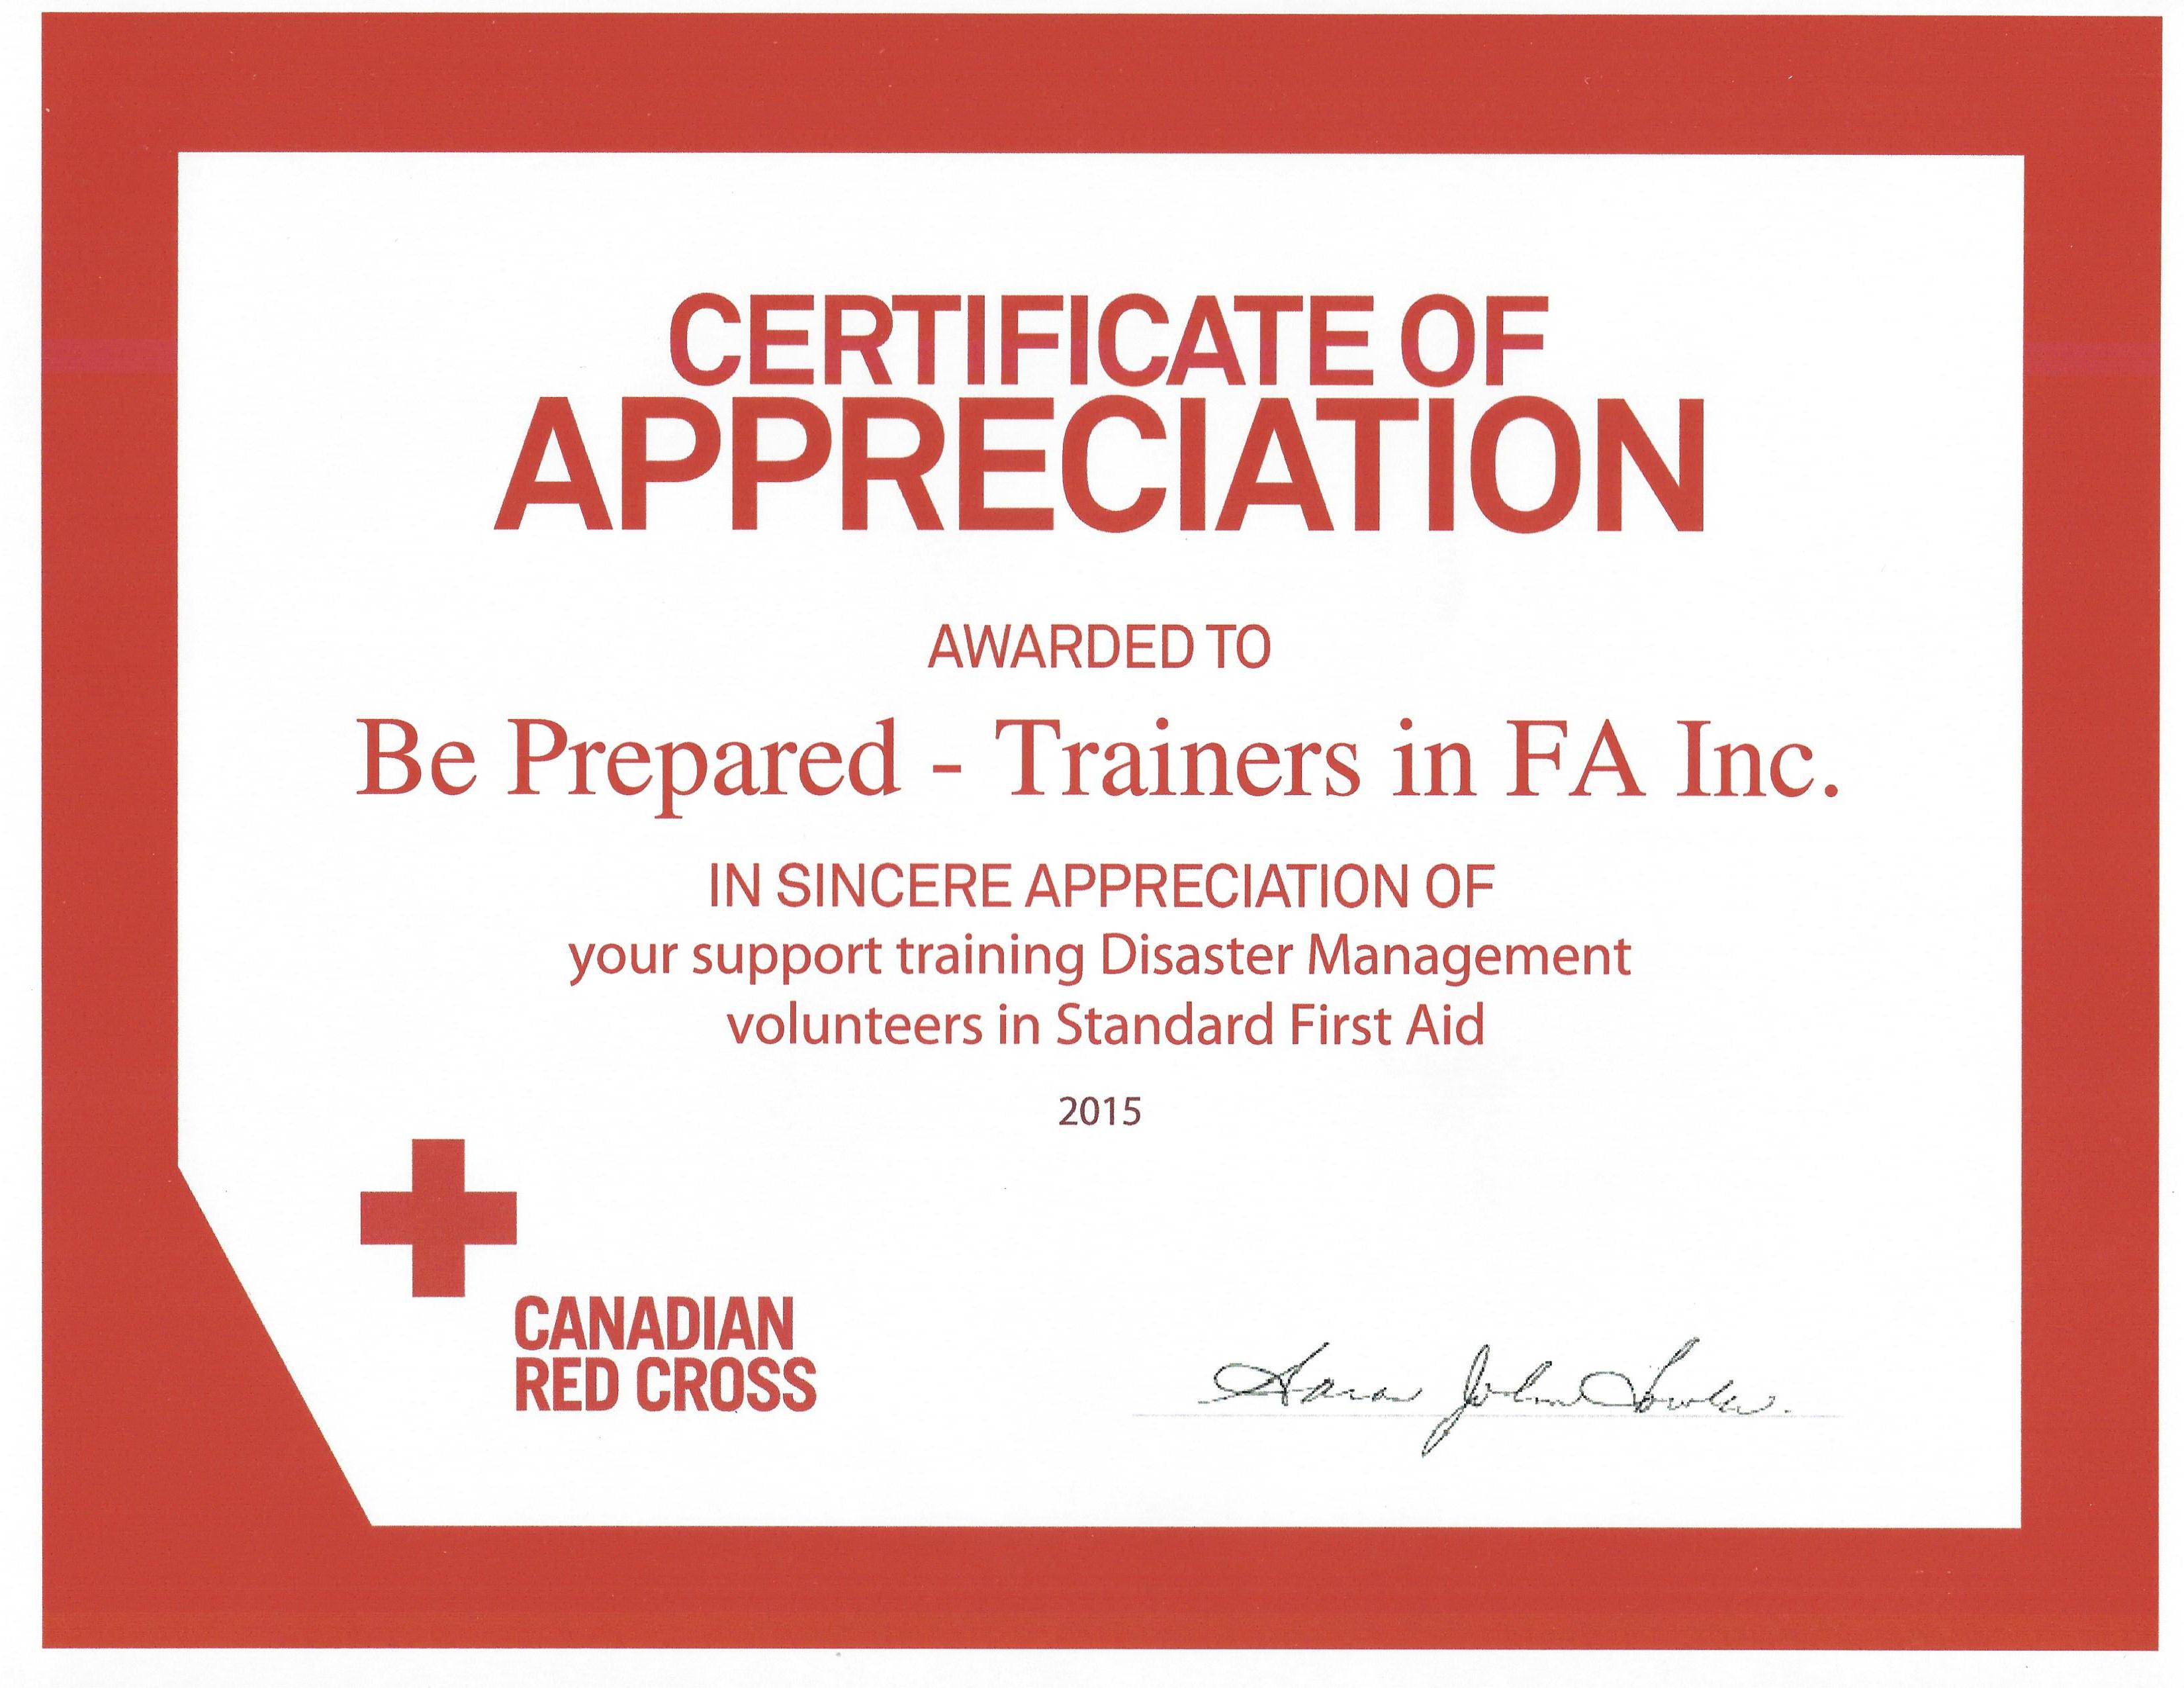 certificate for training